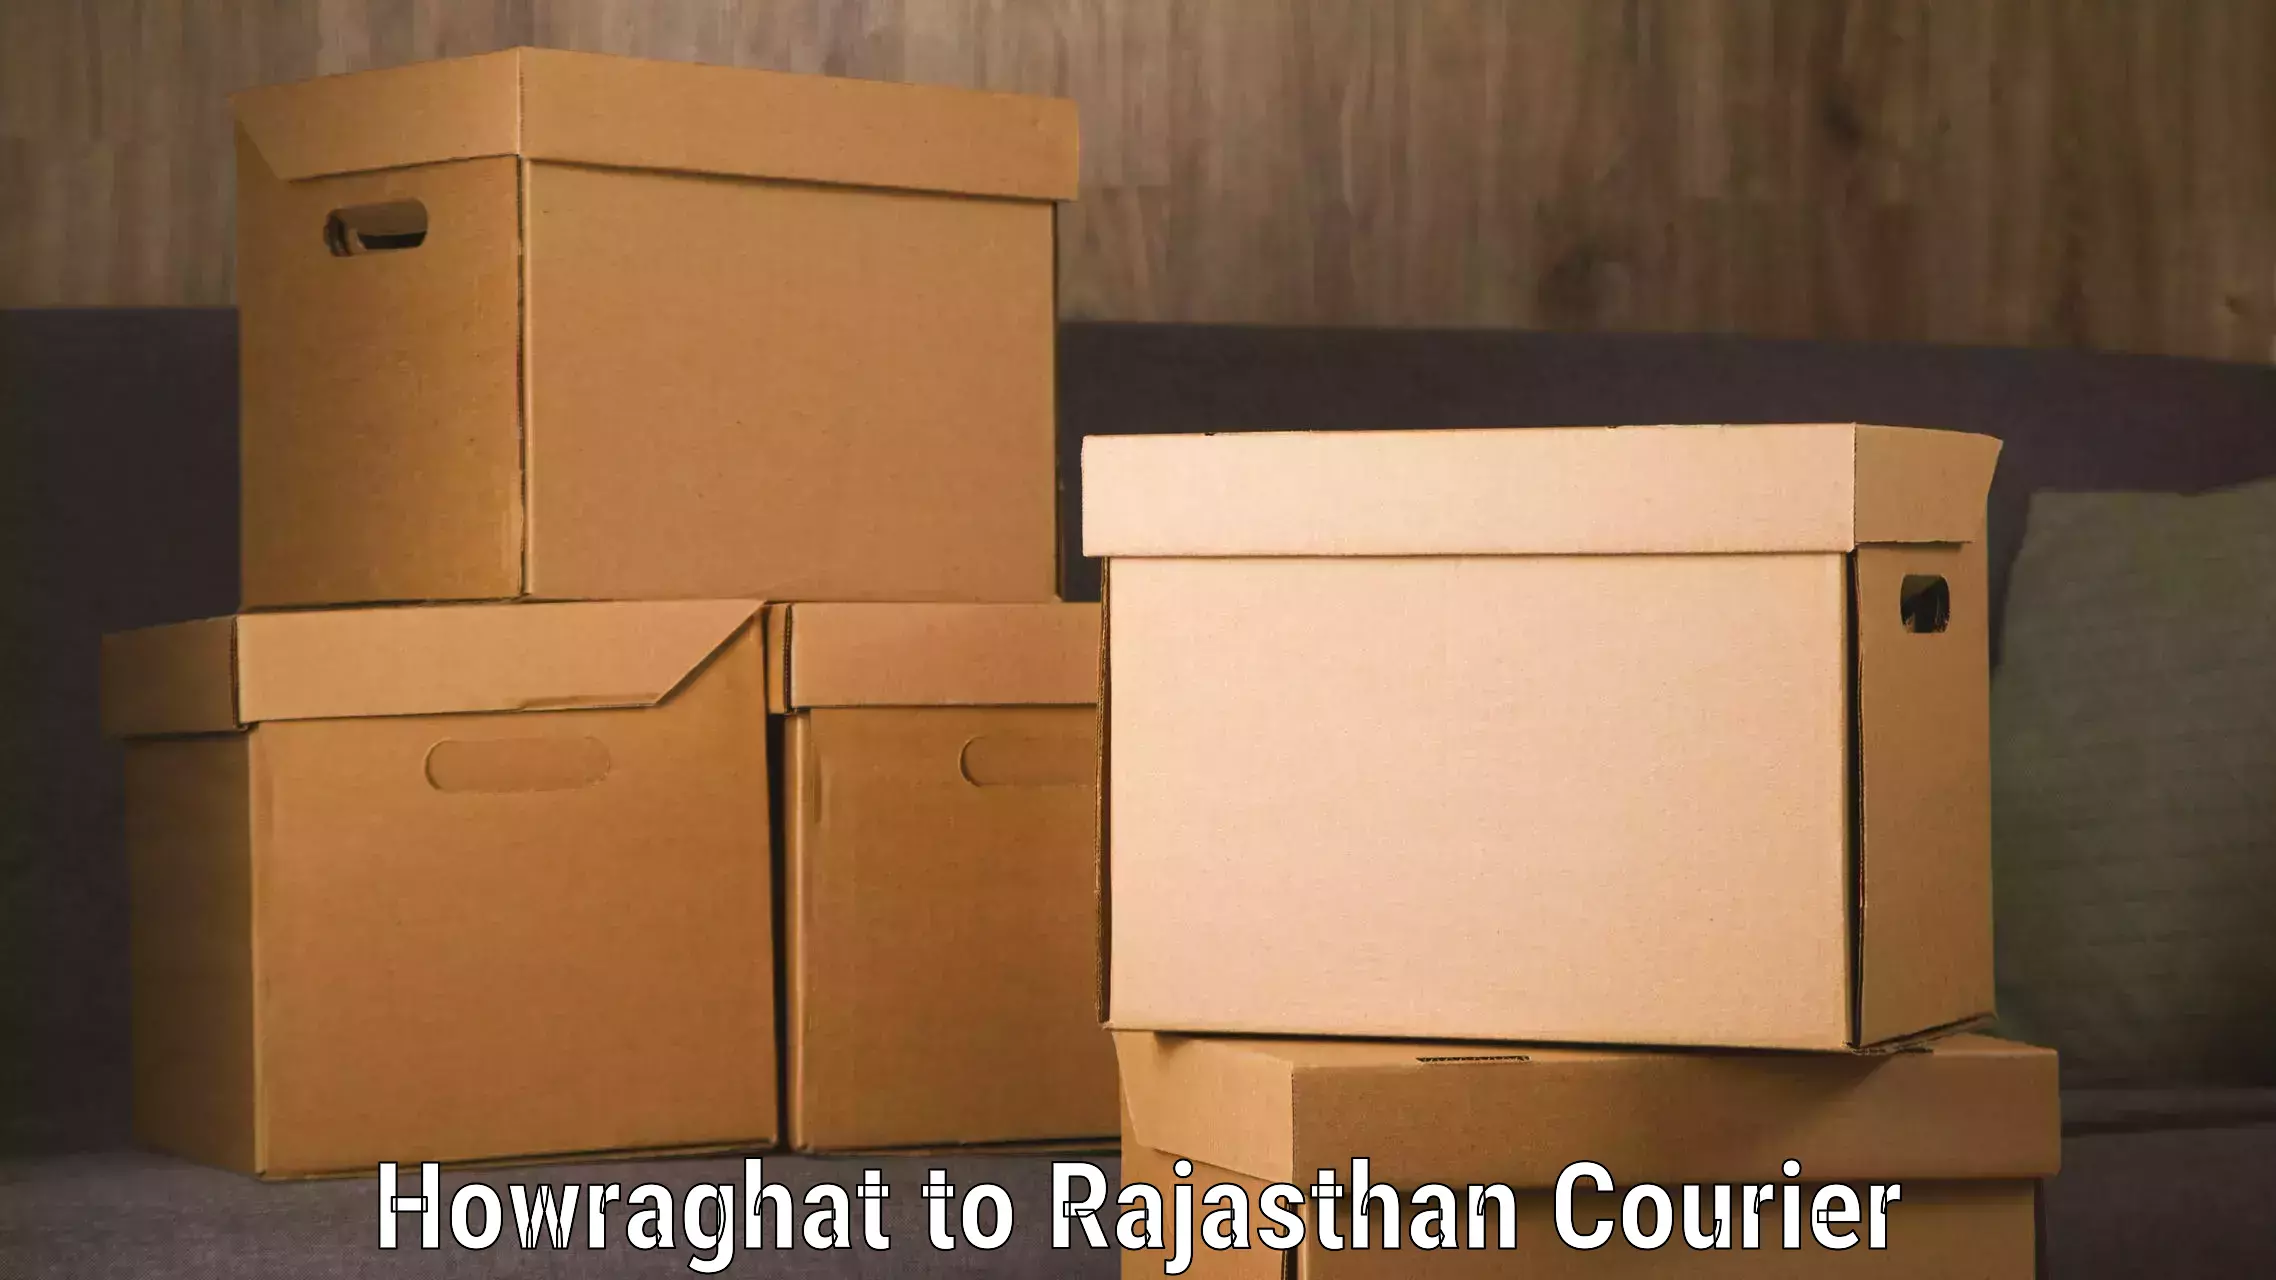 Baggage transport quote Howraghat to Neemrana